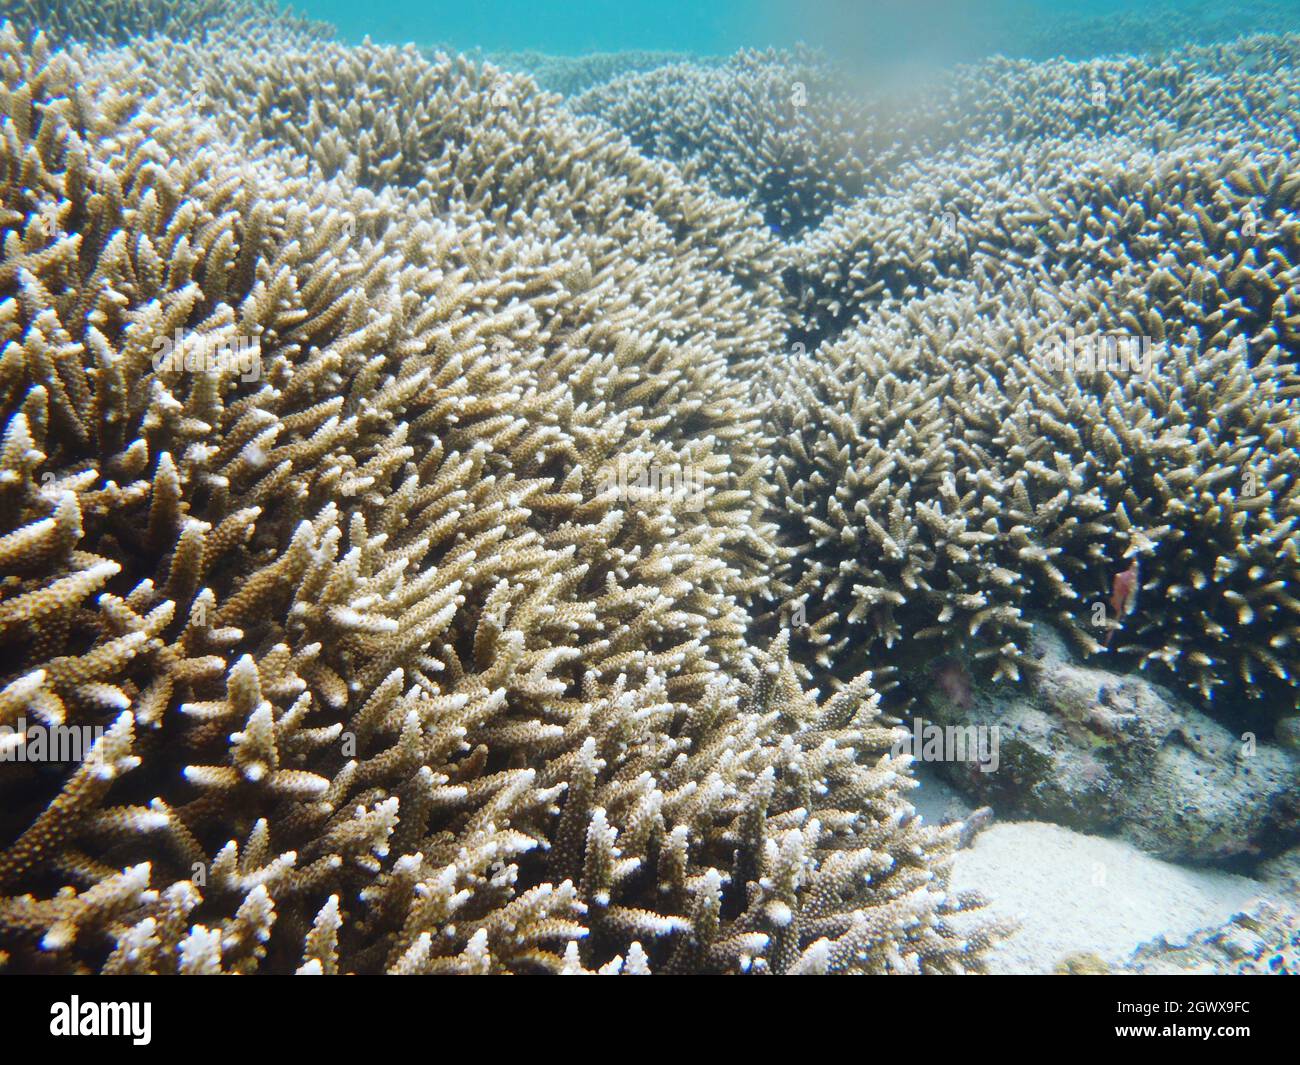 View Of Coral In Sea Stock Photo